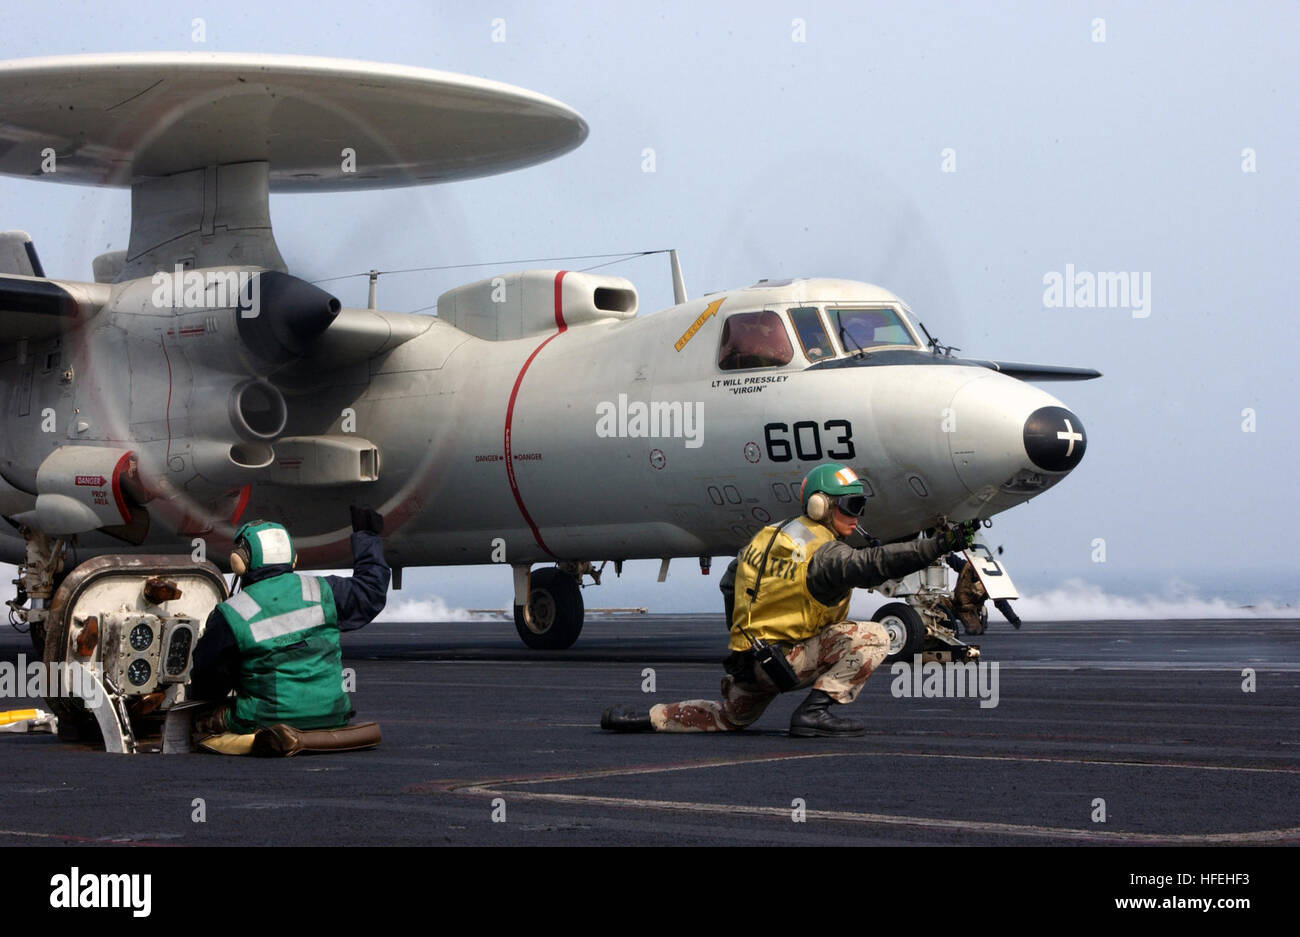 030326-N-0905V-003 Sea of Japan (Mar. 26, 2003) -- A 'Shooter' give the signal to launch an E-2C Hawkeye assigned to the 'Golden Hawks' of Carrier Airborne Early Warning Squadron One One Two (VAW-112) to prepare for launch from one of four steam driven catapults on the flight deck of USS Carl Vinson (CVN 70). Carl Vinson and Carrier Air Wing Eleven (CVW-11) are participating in Exercise Foal Eagle, an annual joint and combined field training exercise between the U.S. and Republic of Korea armed forces.  The exercise is designed to strengthen relationships and improve interoperability between b Stock Photo